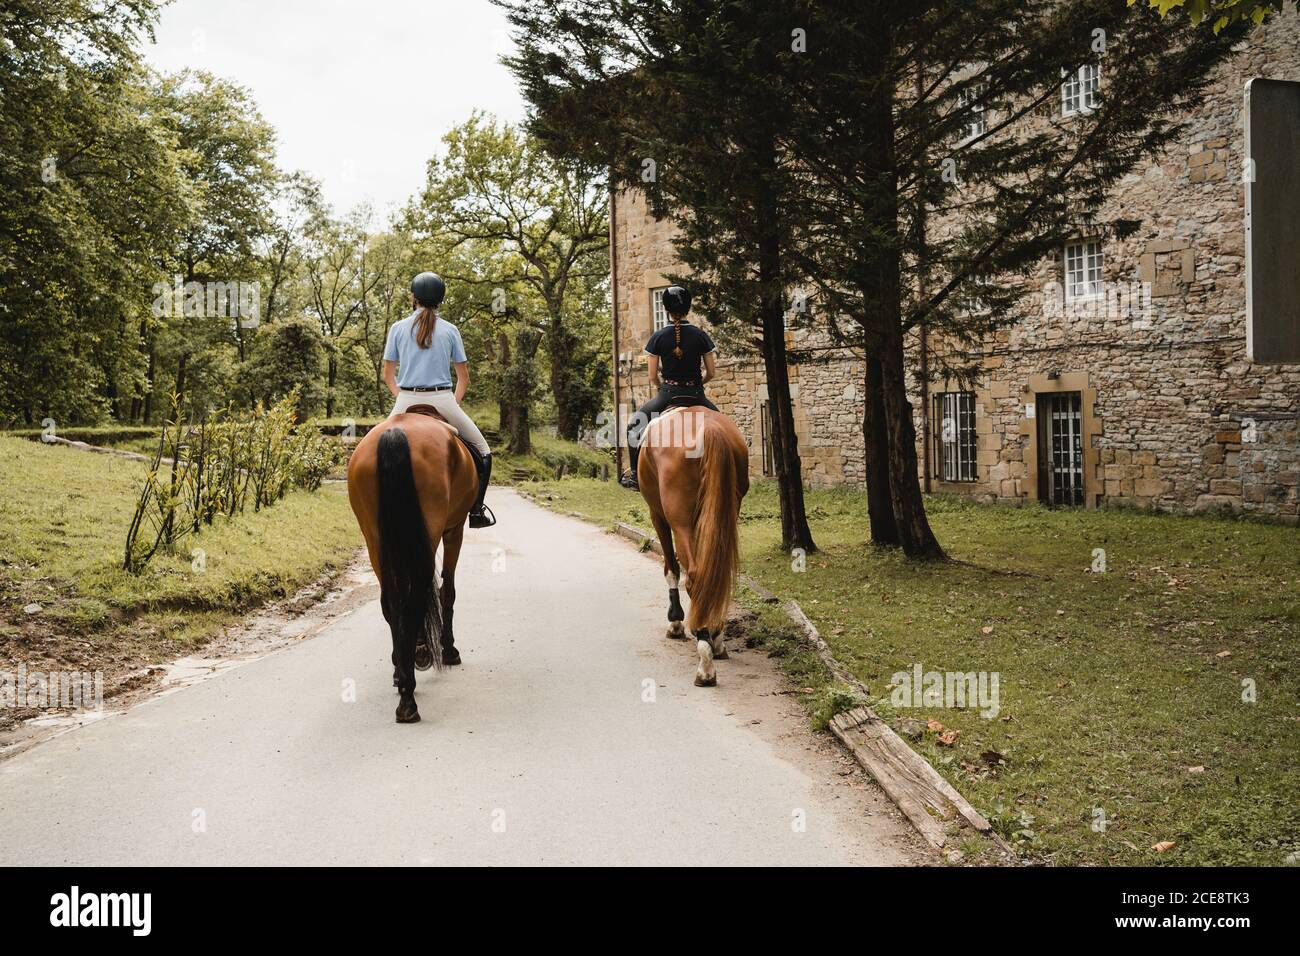 Back view of female equestrians sitting on chestnut horses and riding along paved path Stock Photo